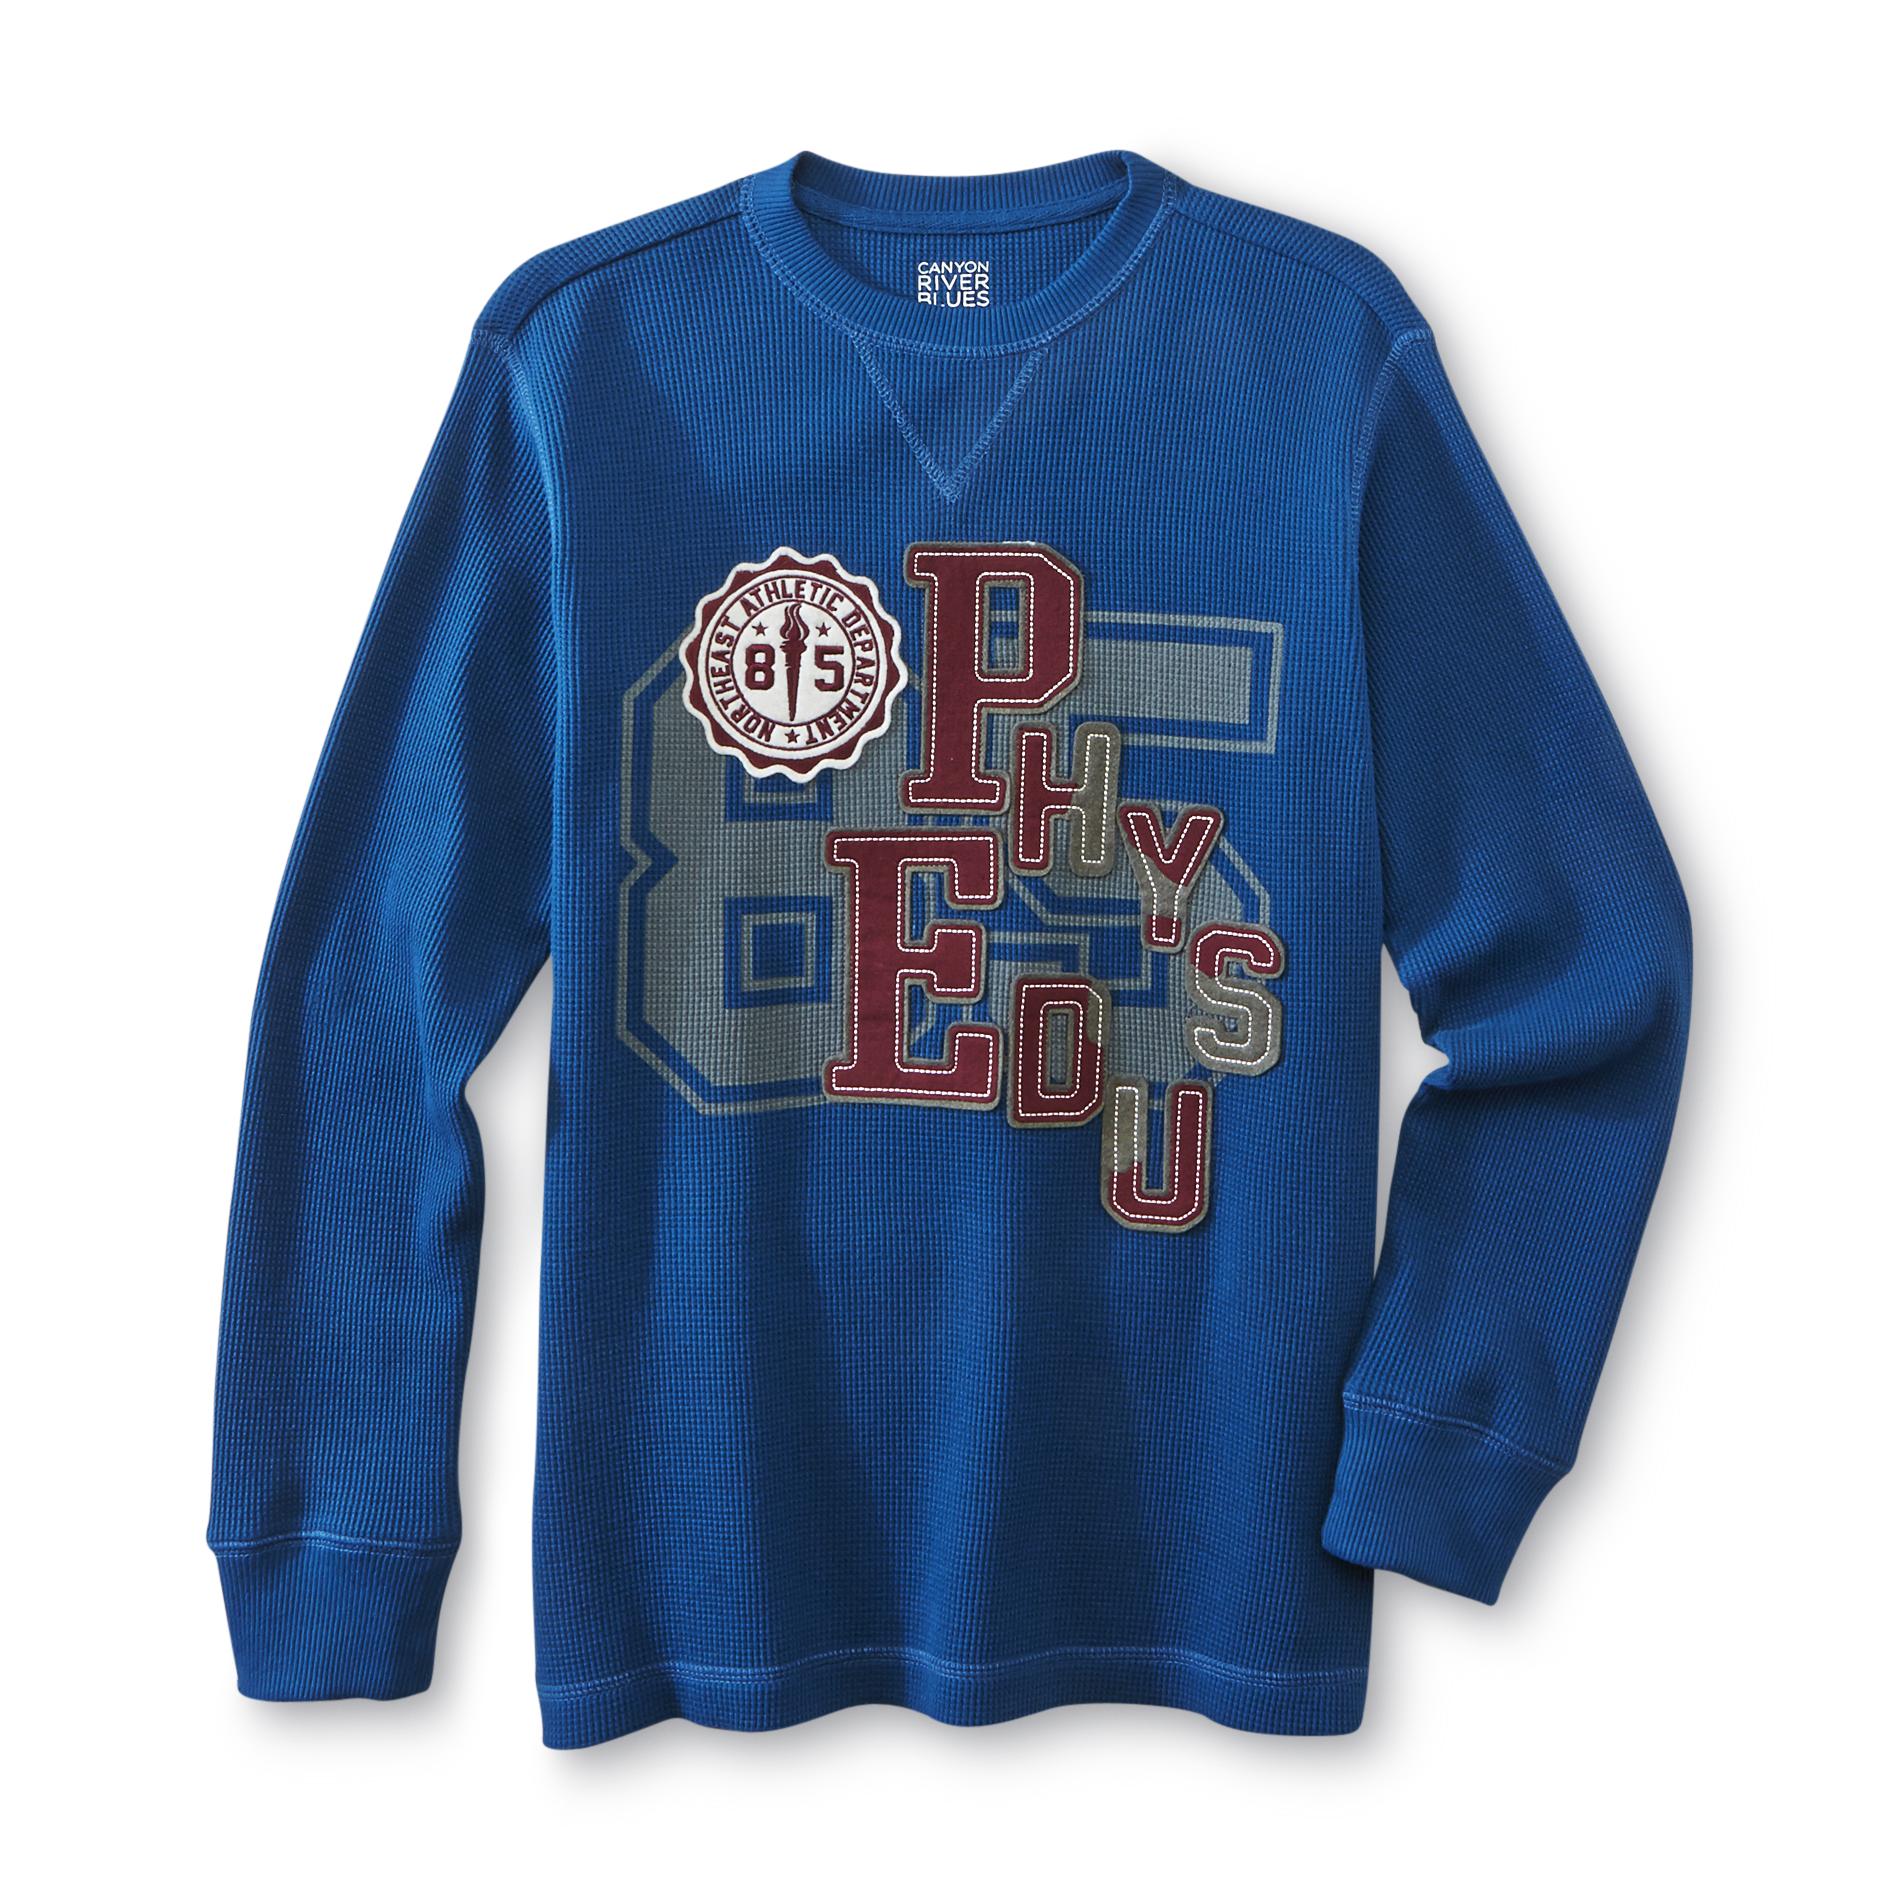 Canyon River Blues Boy's Long-Sleeve Thermal T-Shirt - Athletic Dept.